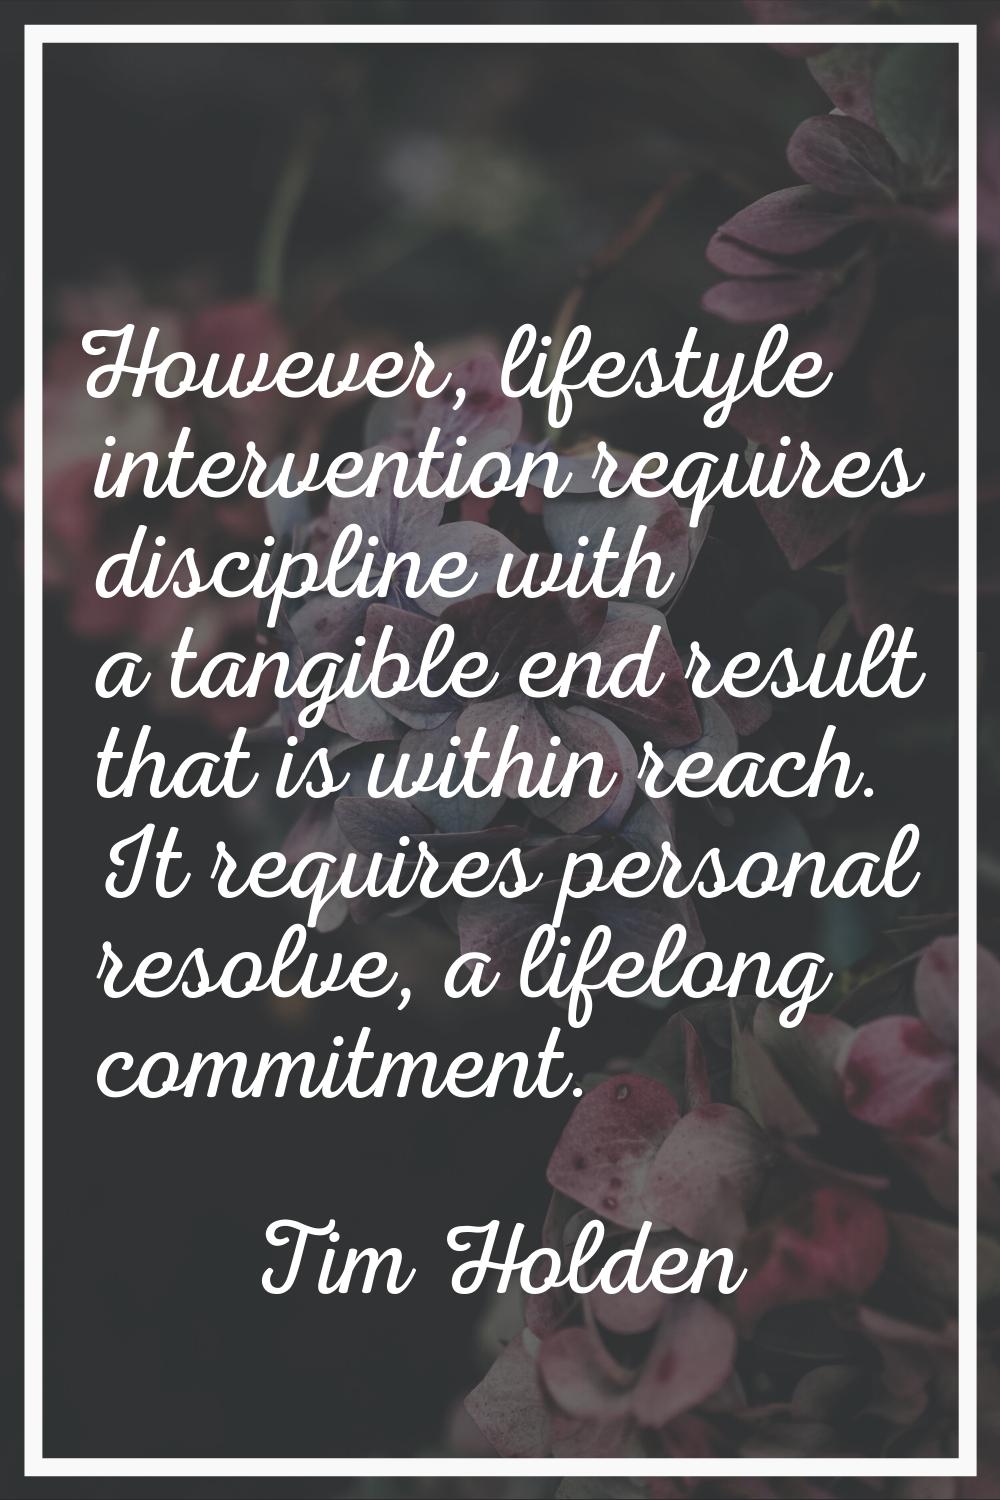 However, lifestyle intervention requires discipline with a tangible end result that is within reach